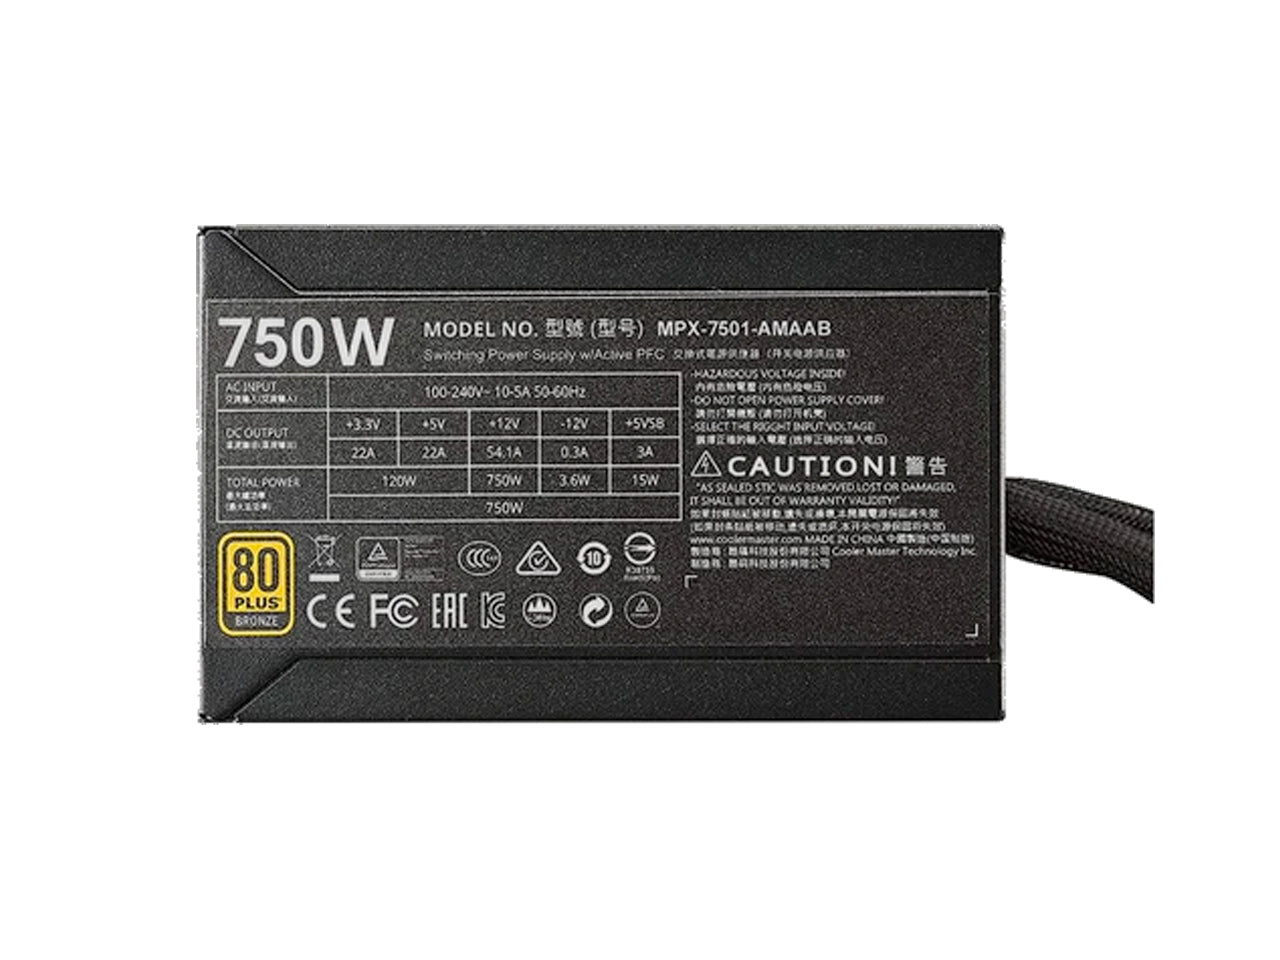 Cooler Master MW Semi-Modular 750W A/UK Cable Power Supply